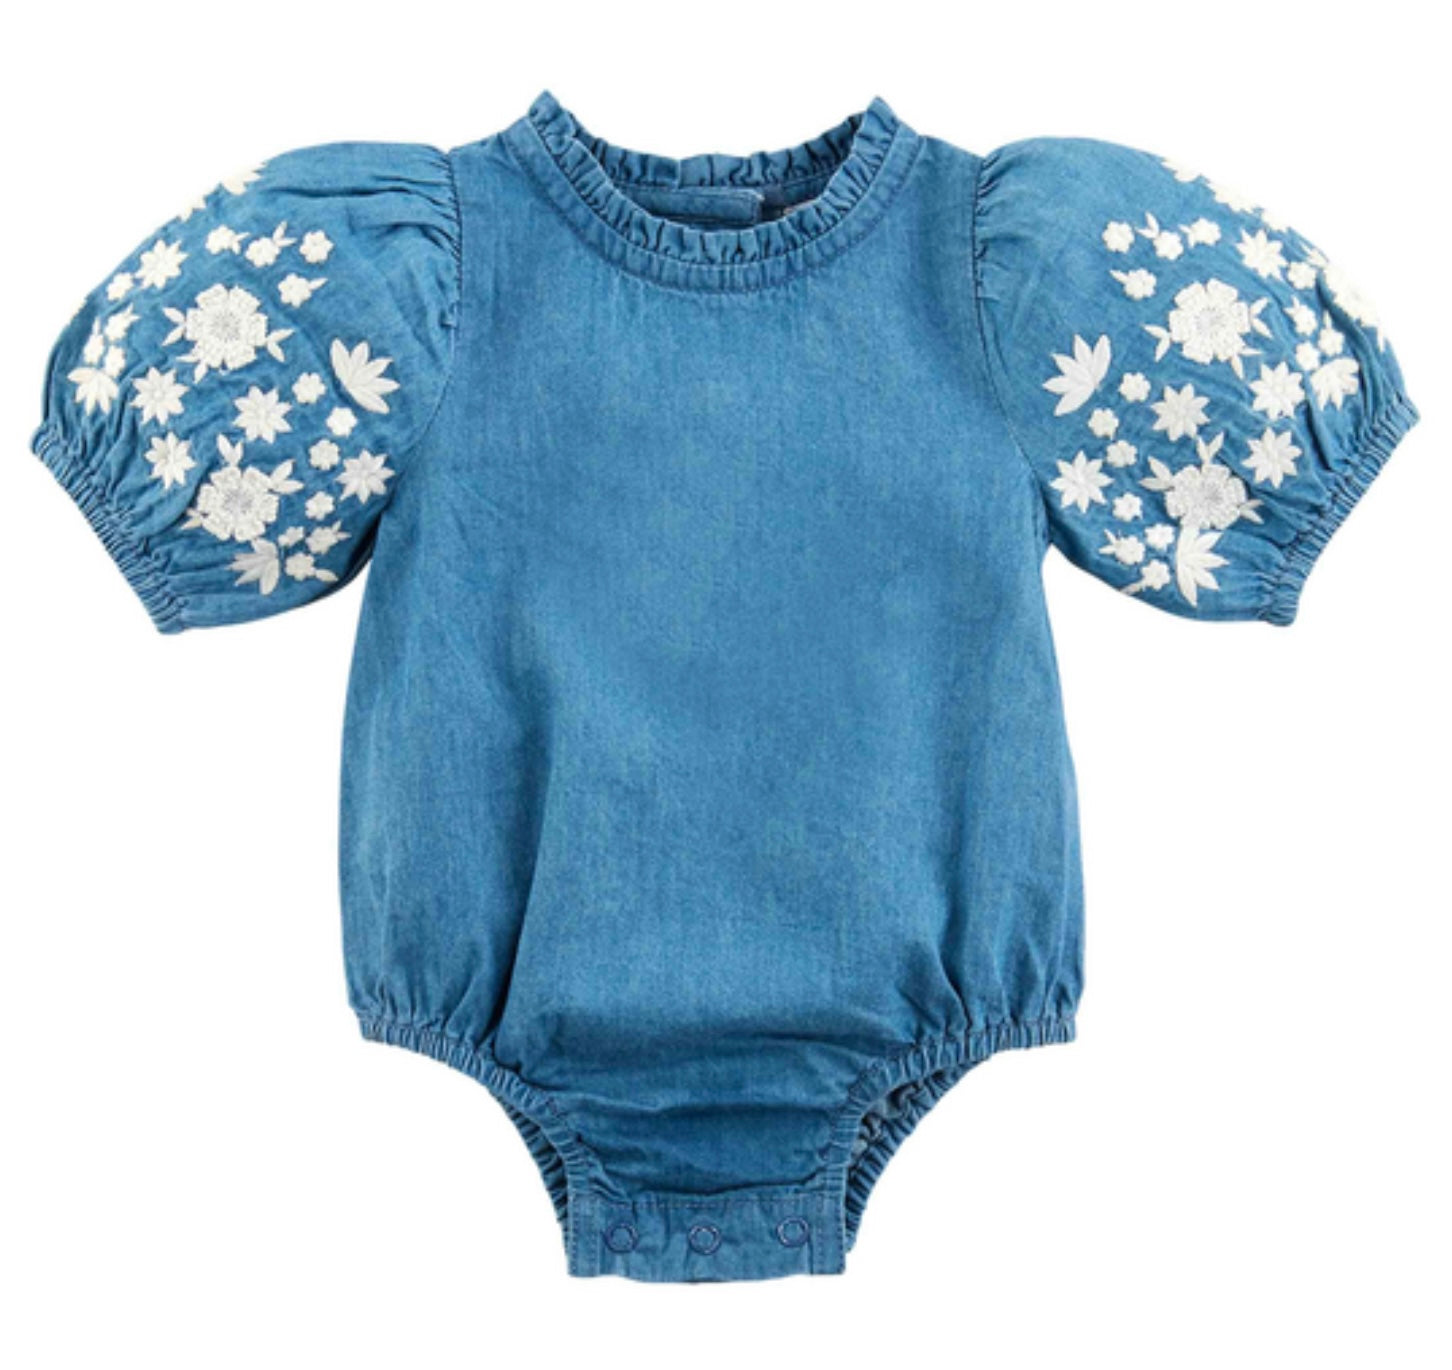 Denim Baby Romper with Embroidered Flowers by Mud Pie sold at Dilaru Boutique Nutley NJ